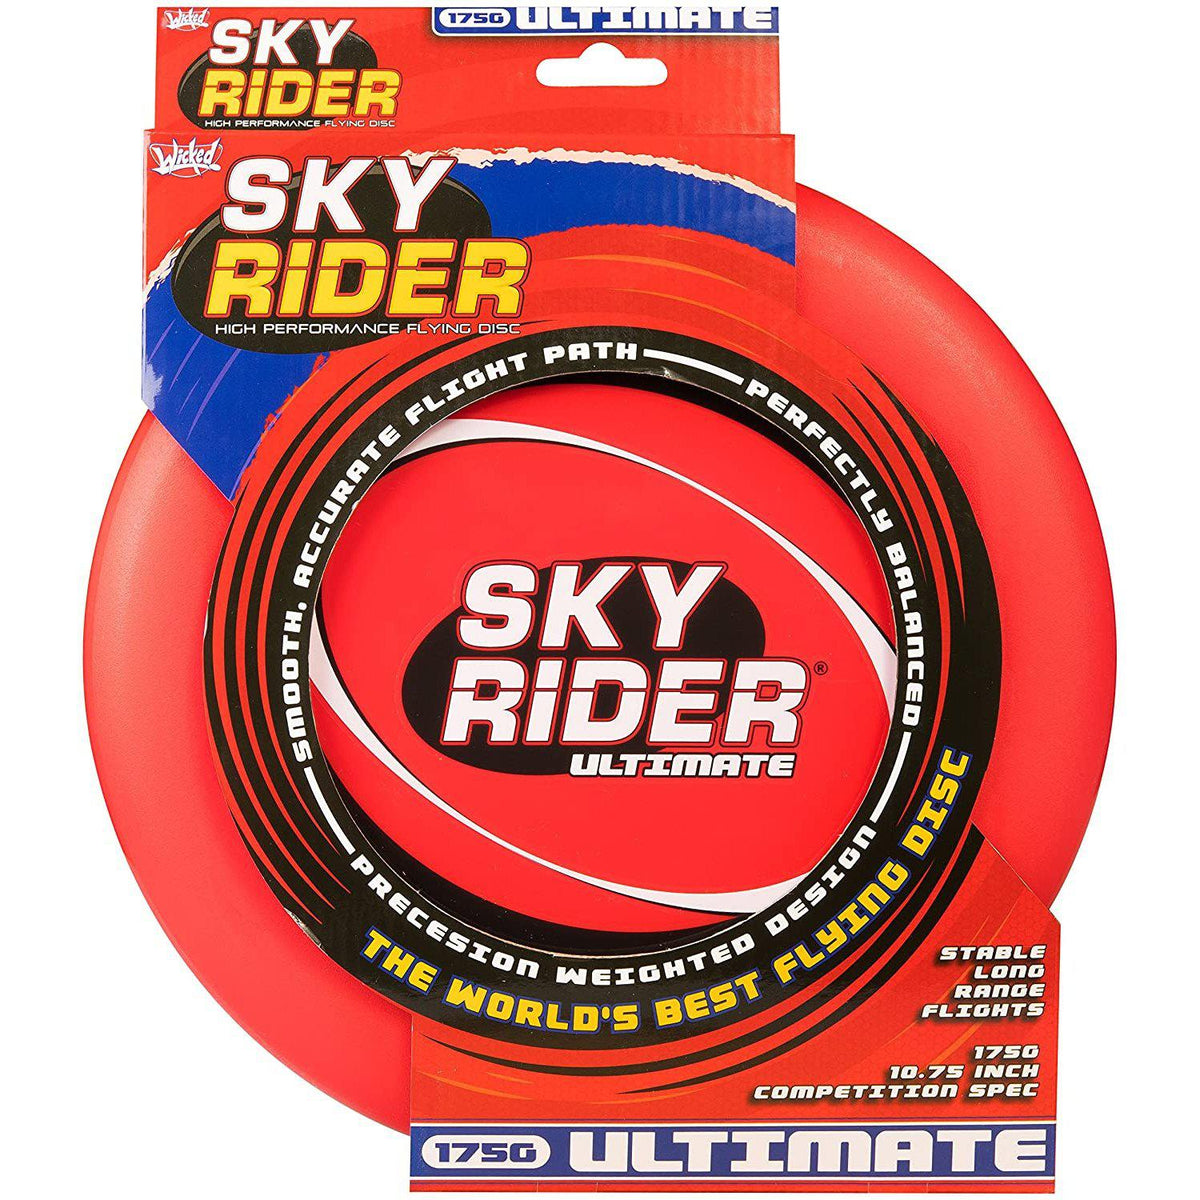 Sky rider ultimate disc in red.